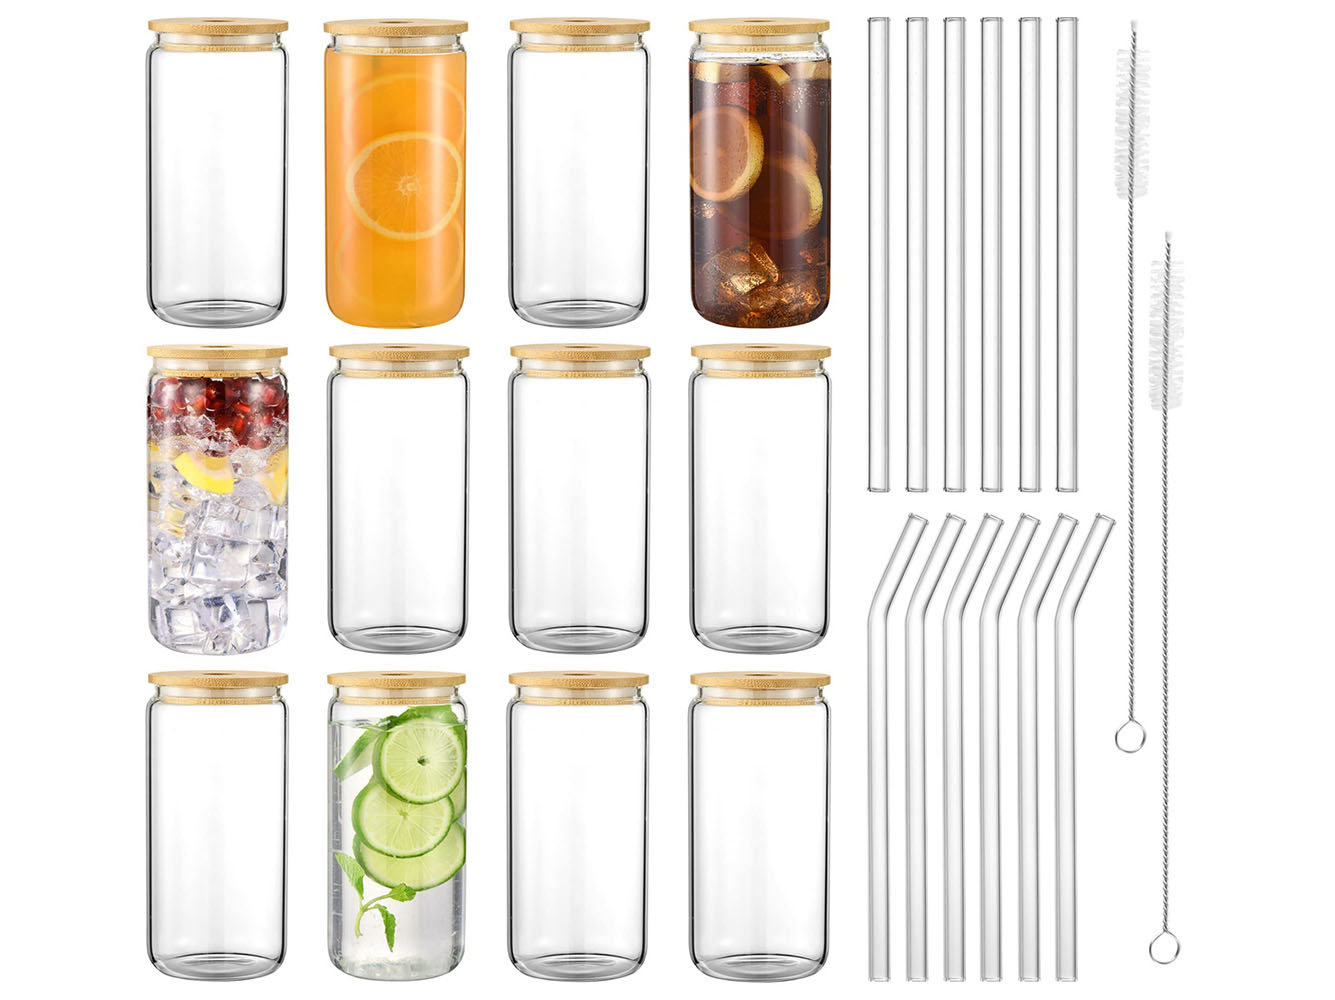 8 Pieces 20oz Drinking Glasses with 8 Pcs Reusable Glass Straw